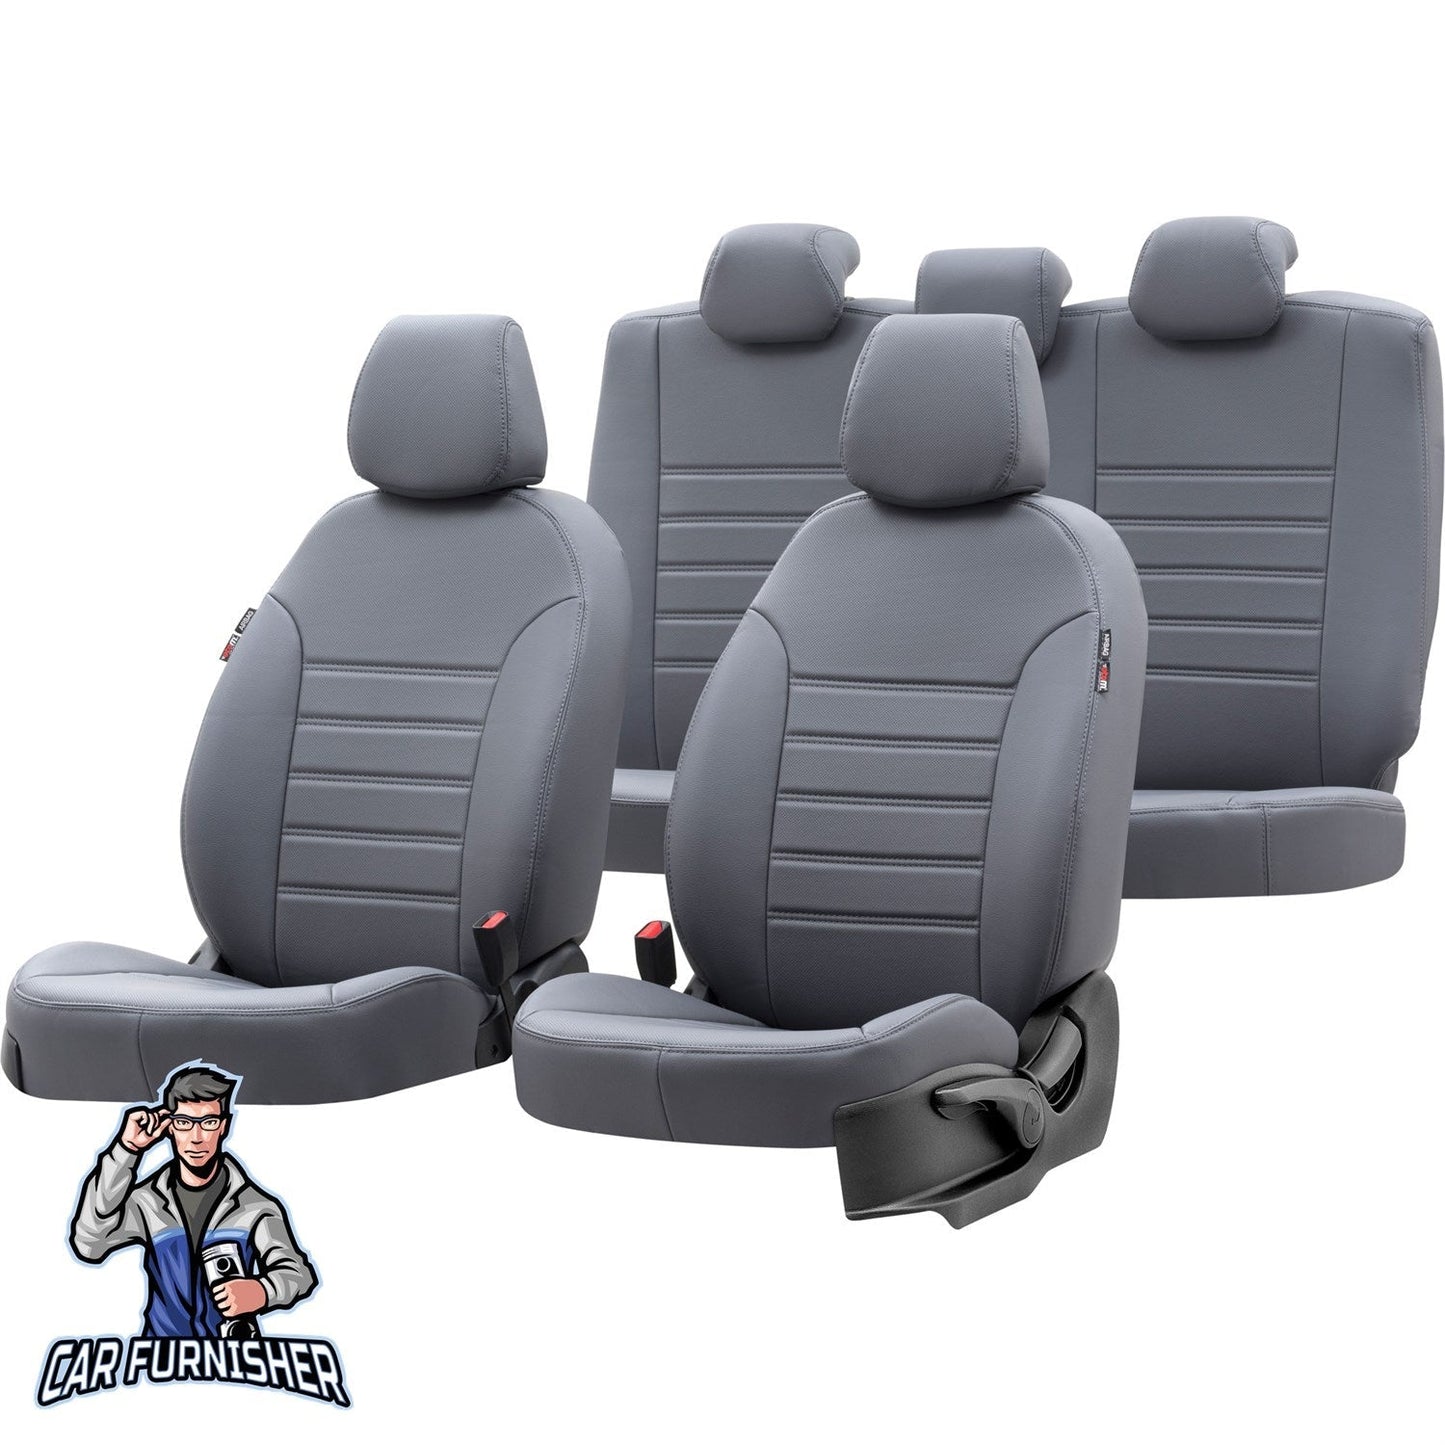 Volkswagen Caravelle Seat Cover Istanbul Leather Design Smoked Leather